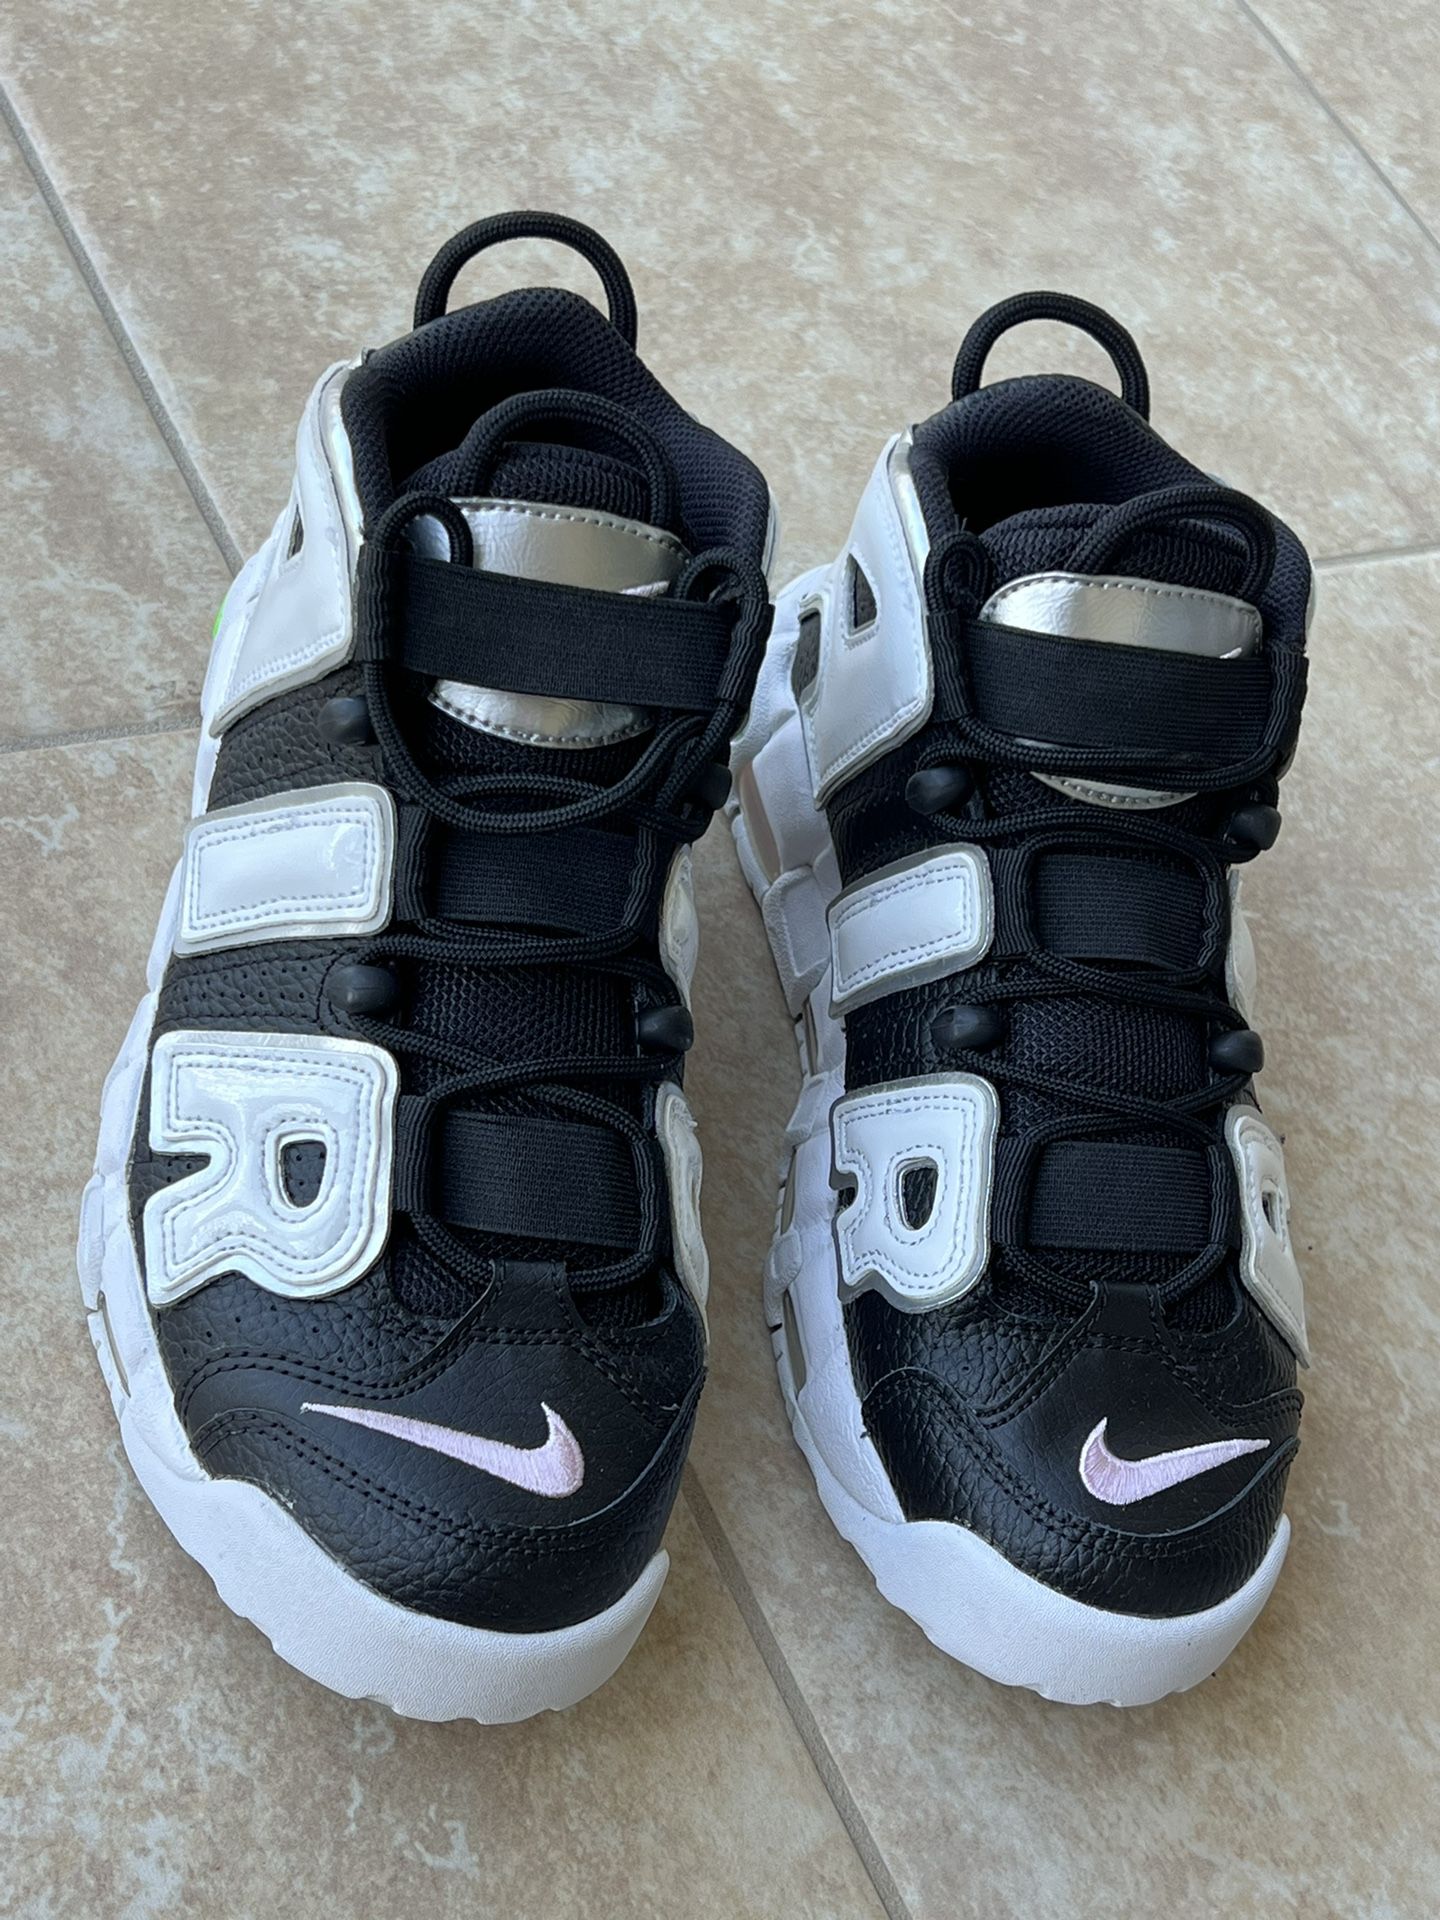 Nike Air More Uptempo White Black Green Mid Top Sneakers  Women Shoes Size 9